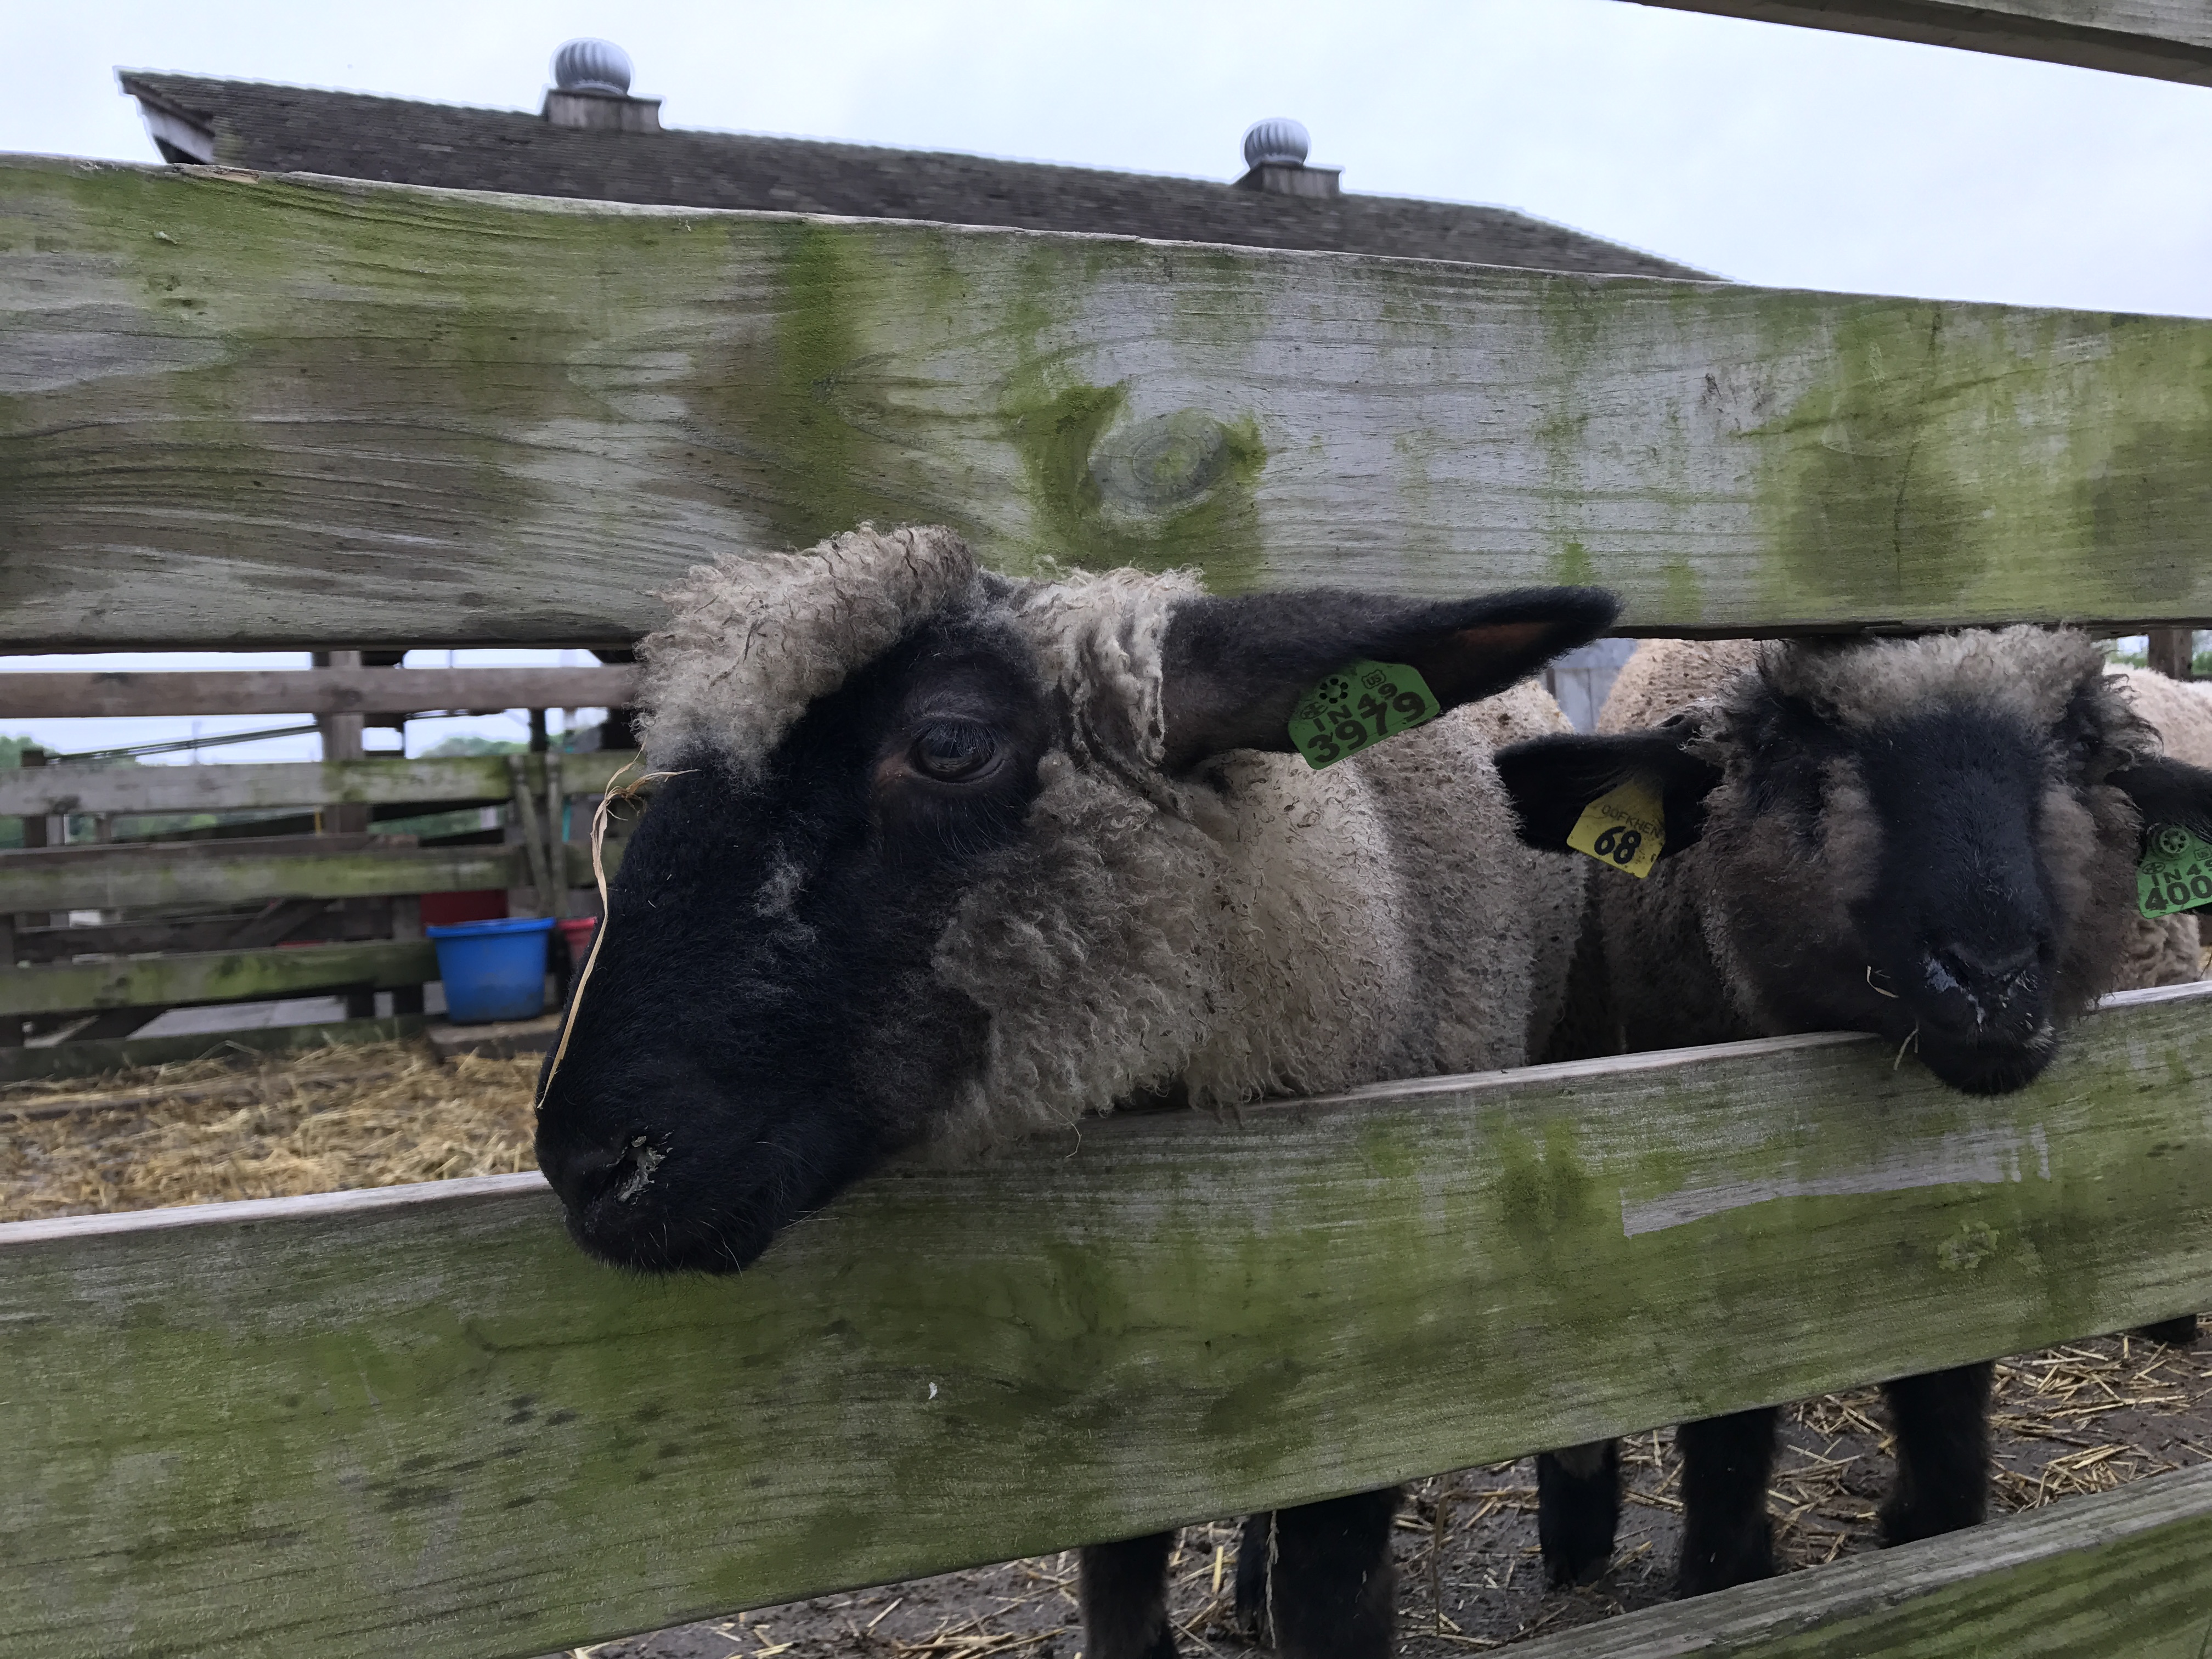 Two sheep sticking their heads through the wooden fence.